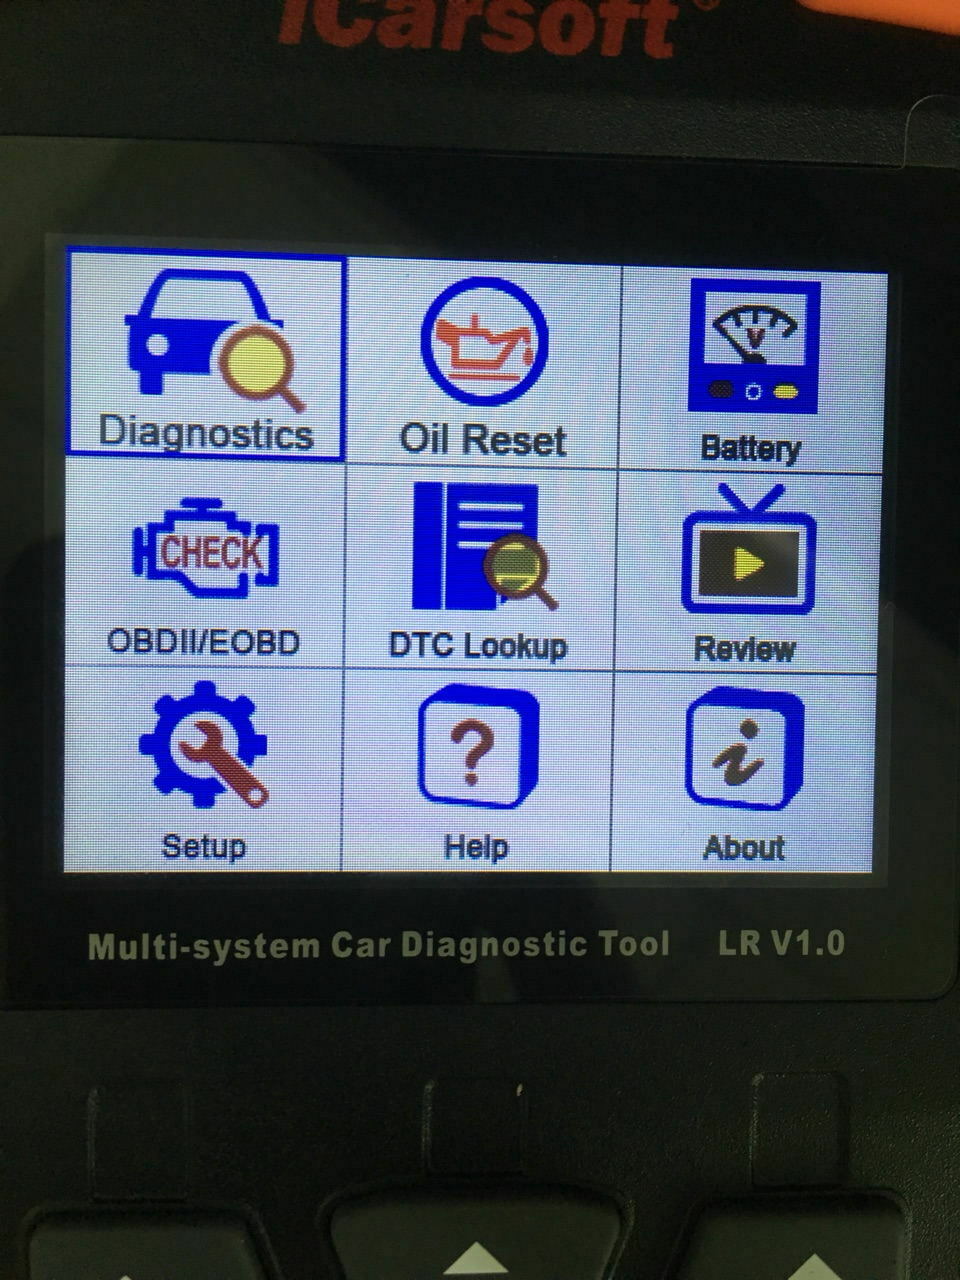 iCarsoft LR V1.0 For LAND ROVER R ROVER Professional Diagnostic Scan Tool LATEST - Lifafa Denmark